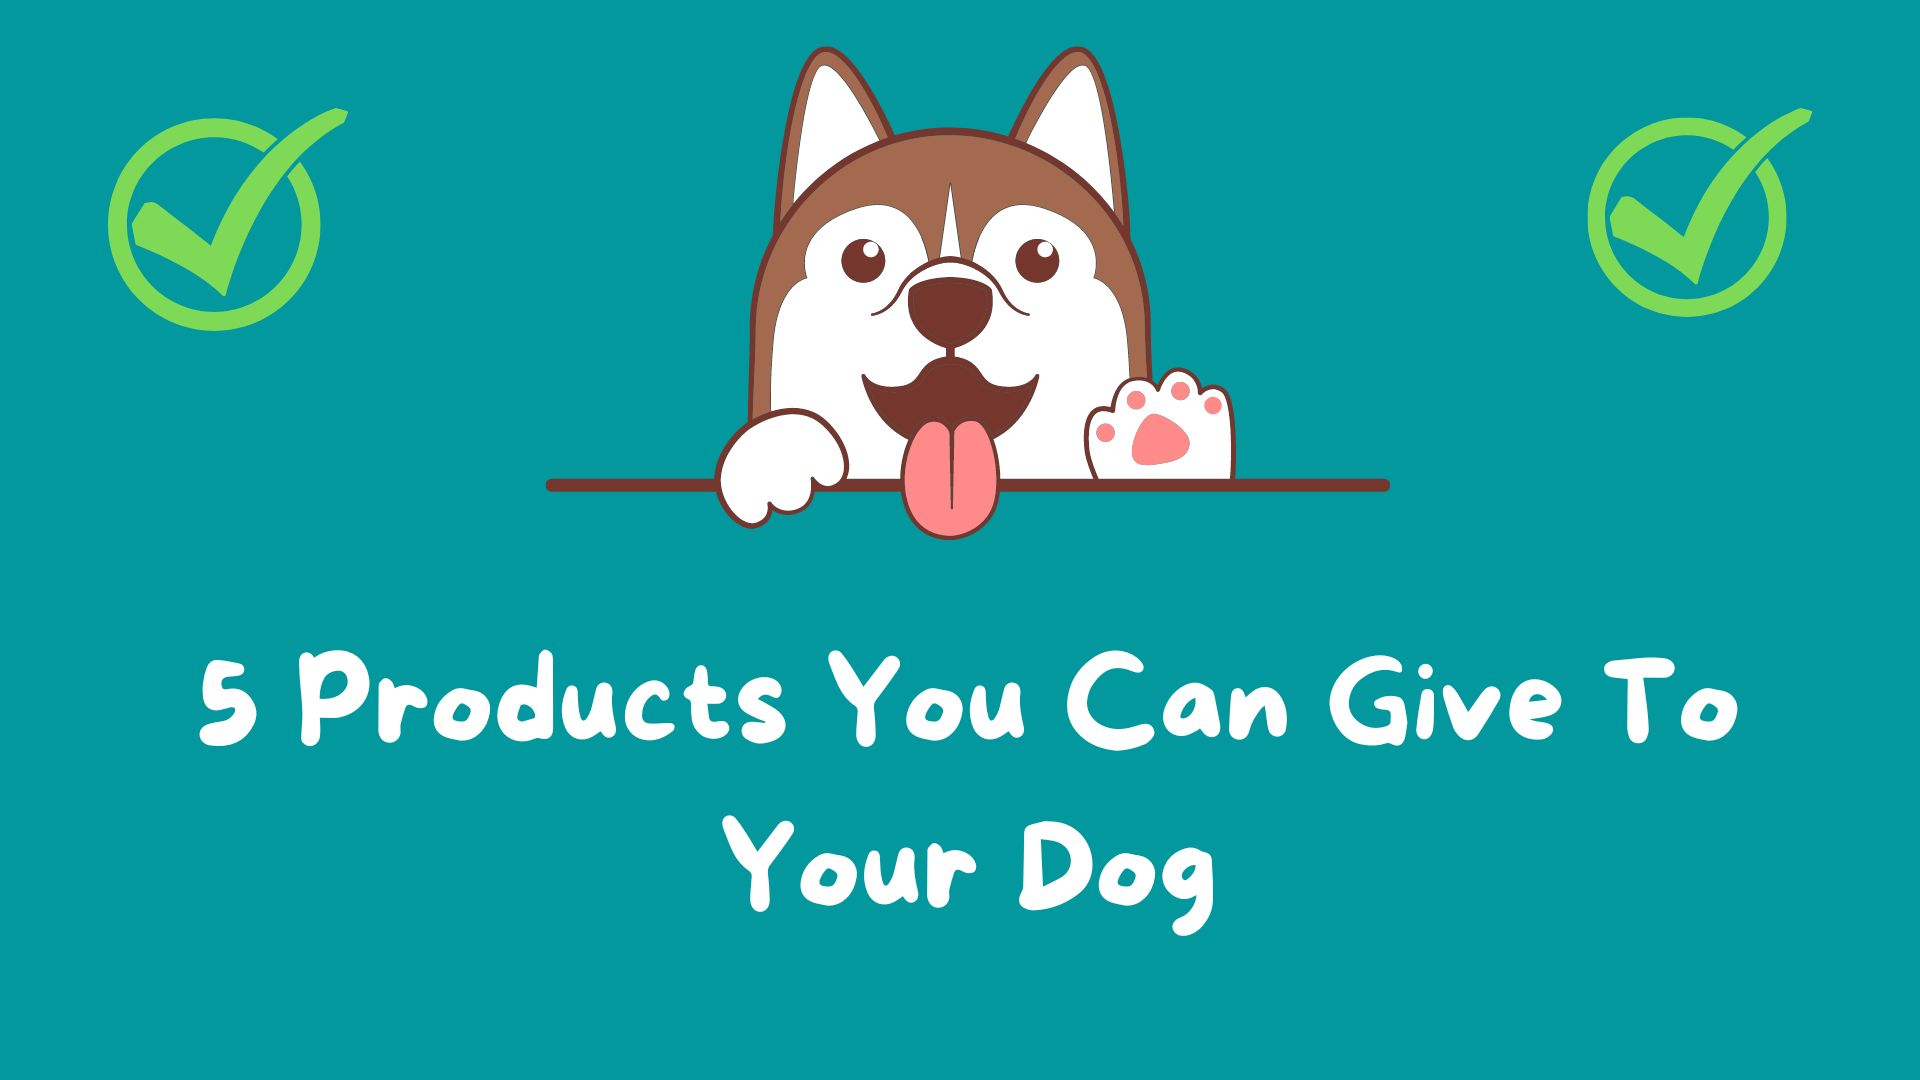 5 Products You Can Give To Your Dog